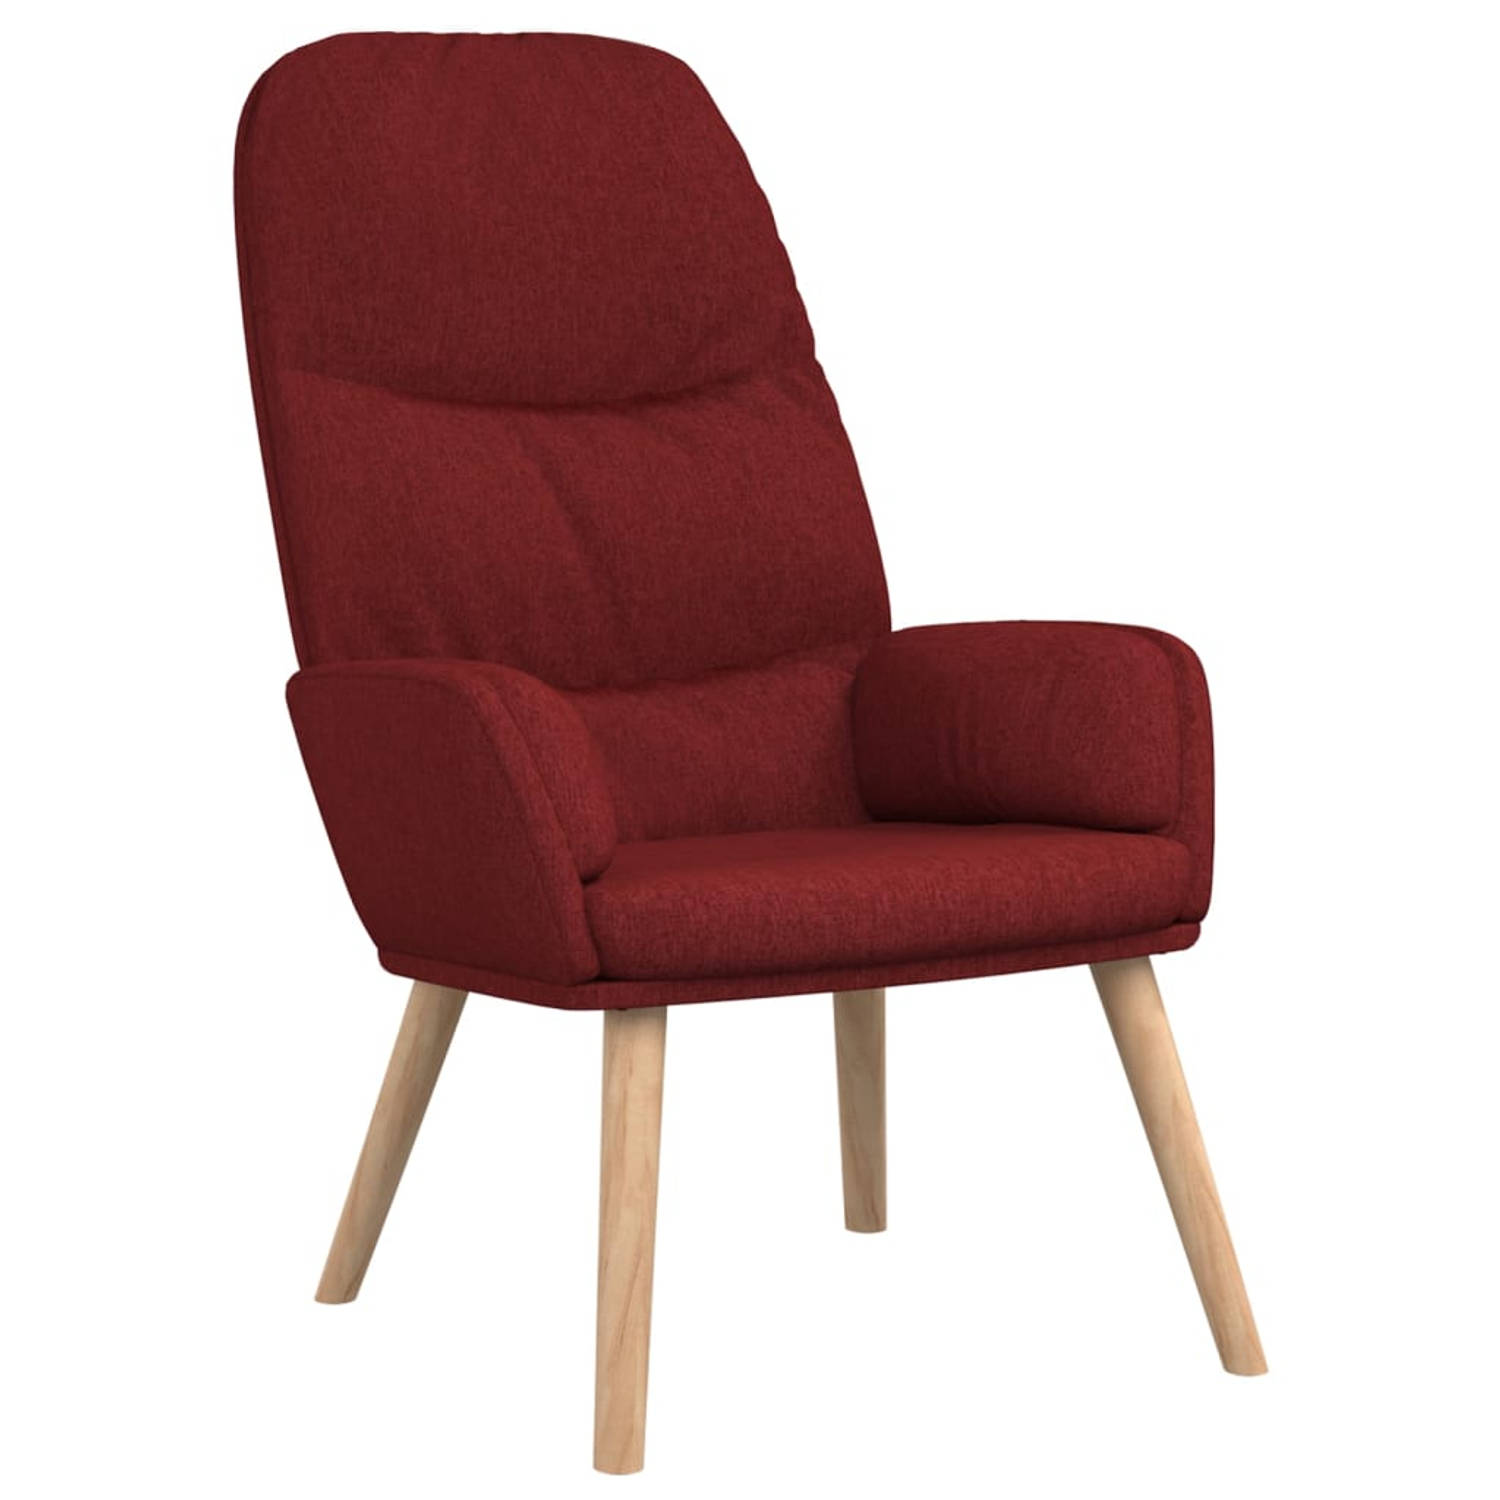 The Living Store Relaxstoel stof wijnrood - Fauteuil